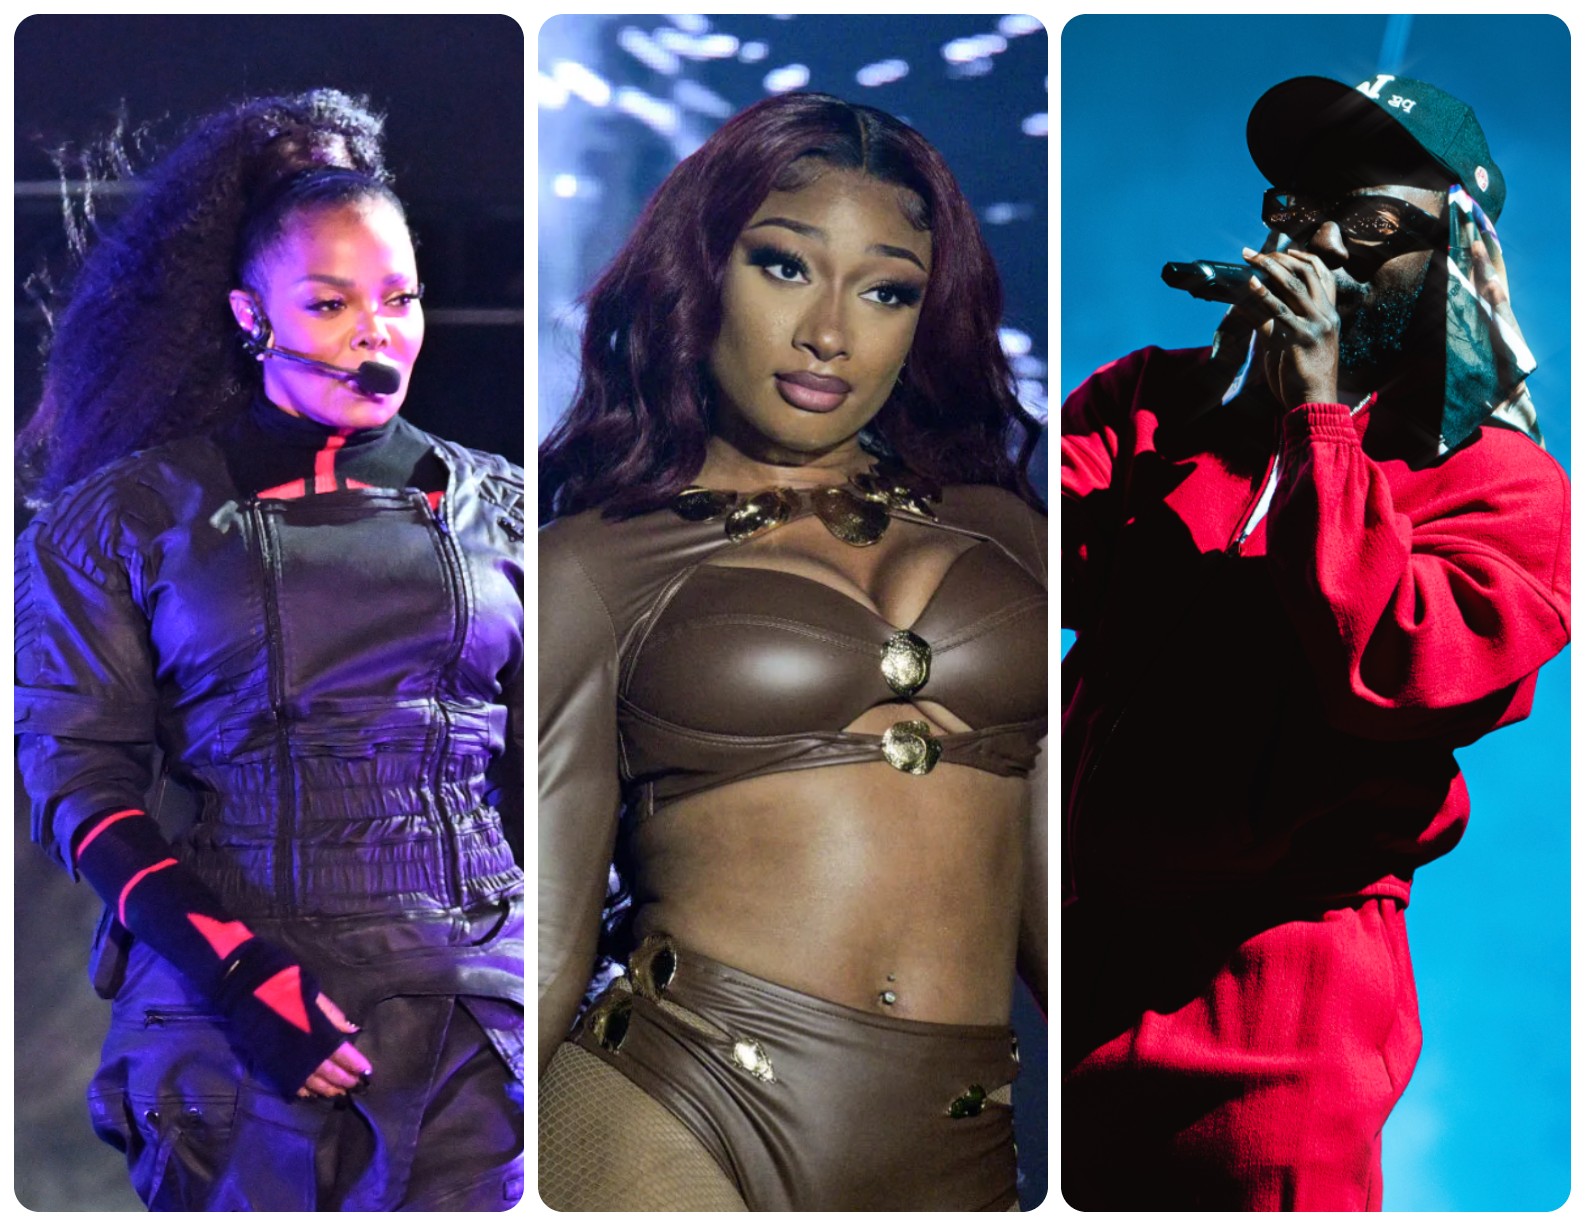 ONE Musicfest Electrifies 100K Attendees With Powerful Performances & Extravagant Activations At Atlanta’s Piedmont Park